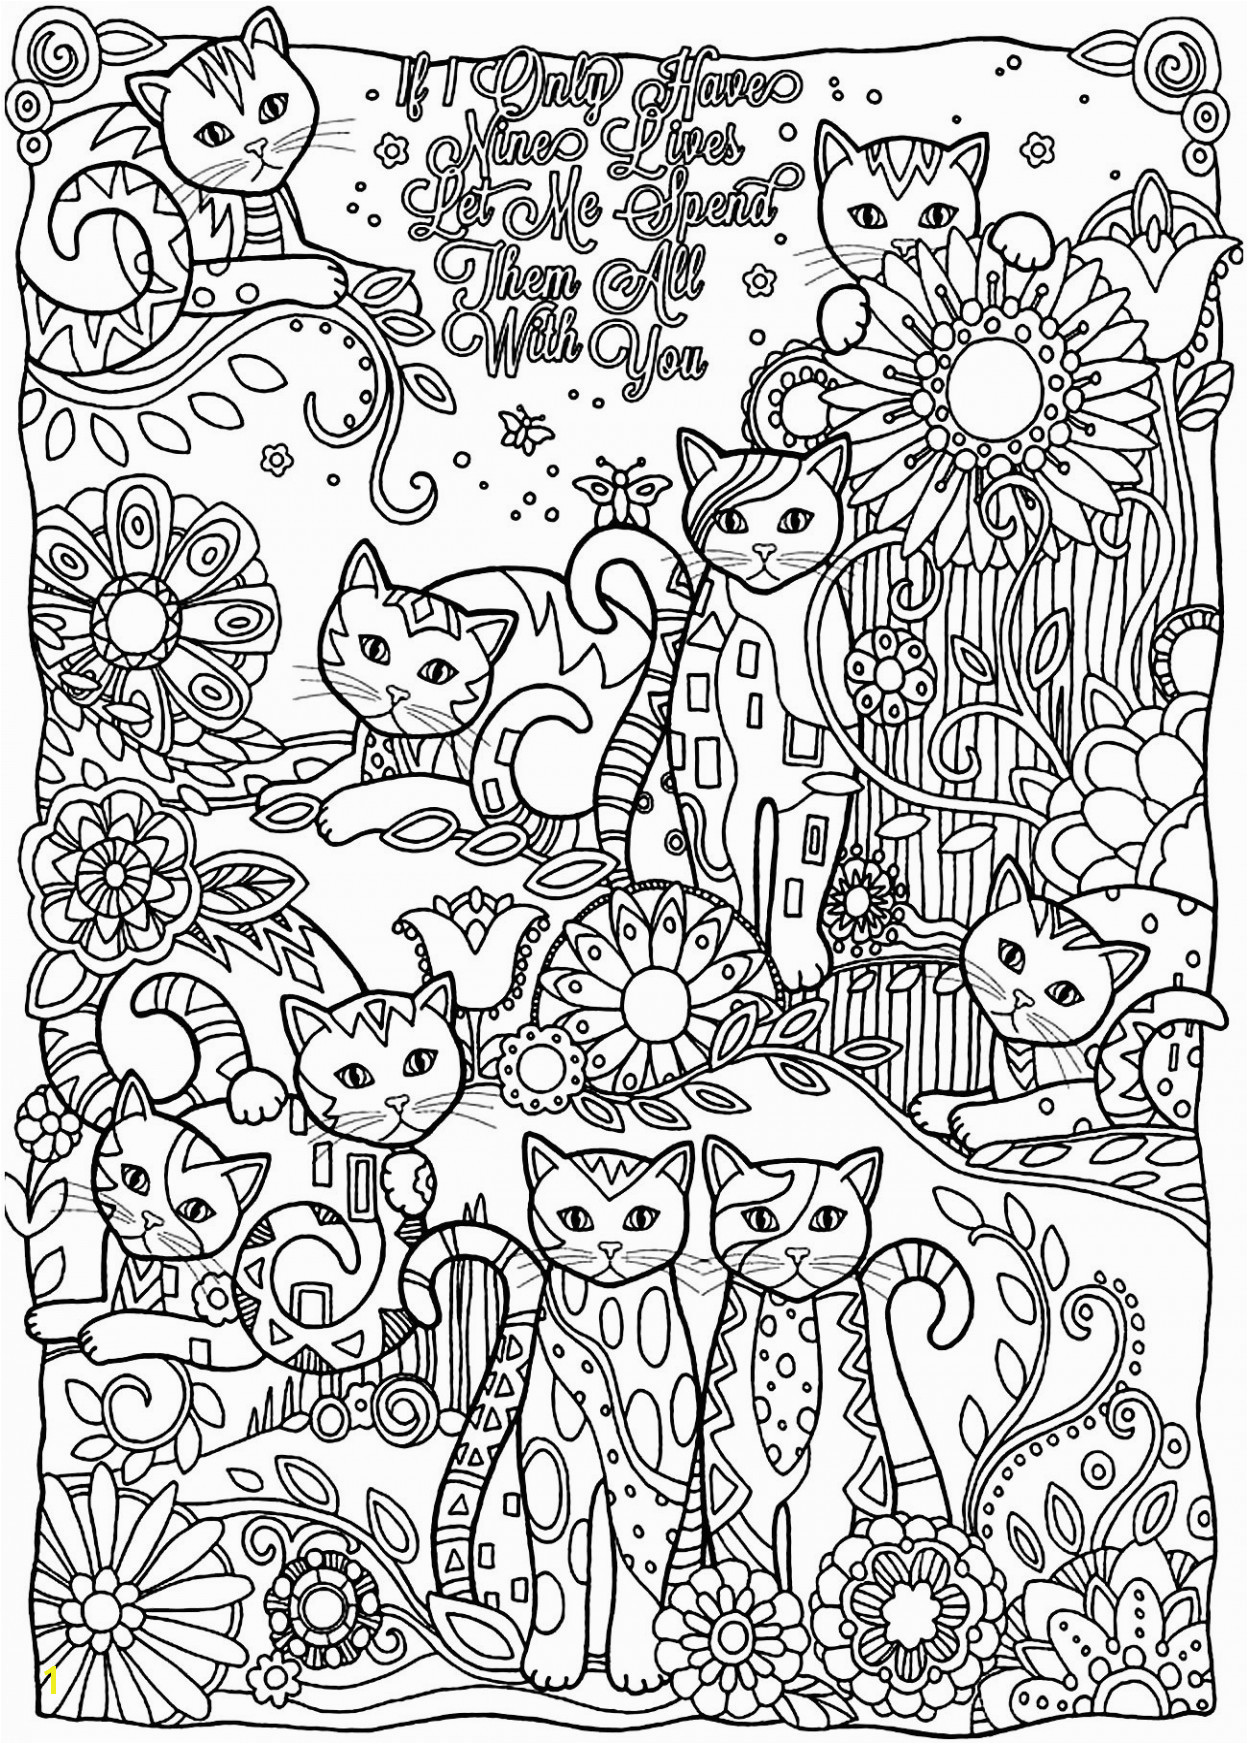 Easter Coloring Pages Printable Easter Coloring Pages Free Printable Best Od Dog Coloring Pages